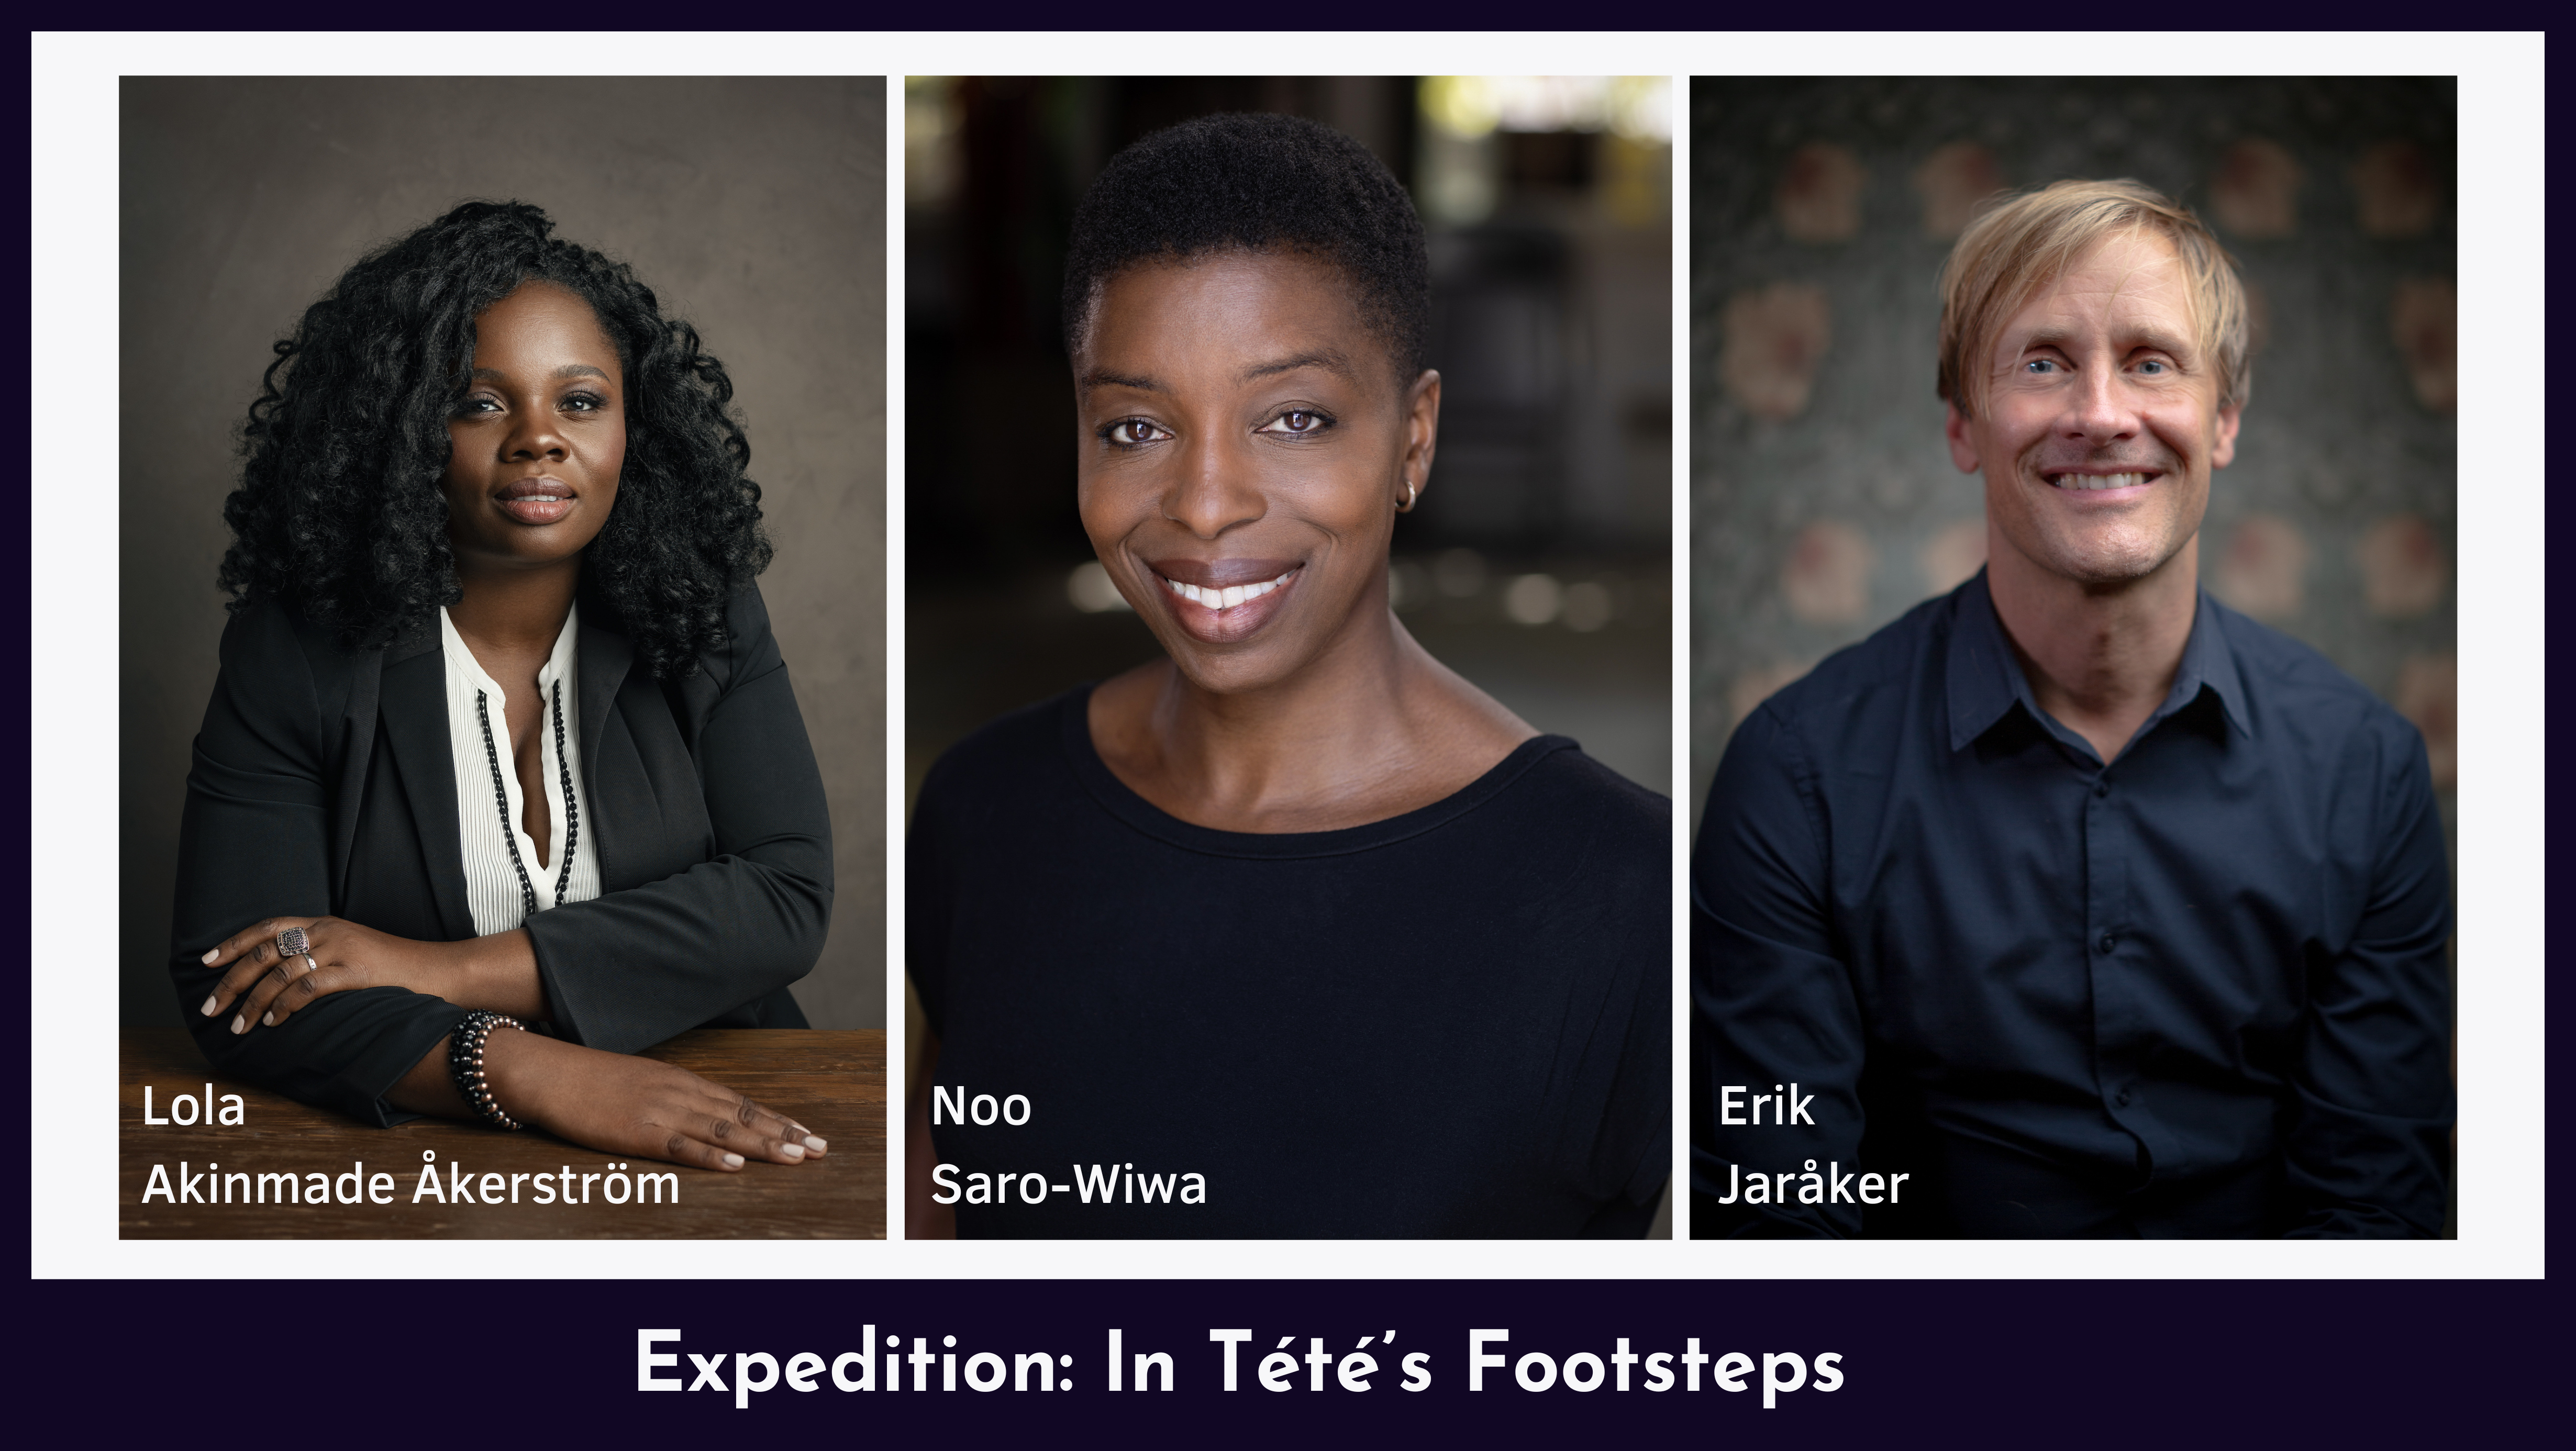 Headshots of three prospective expeditioners for “In Tété's Footsteps” project